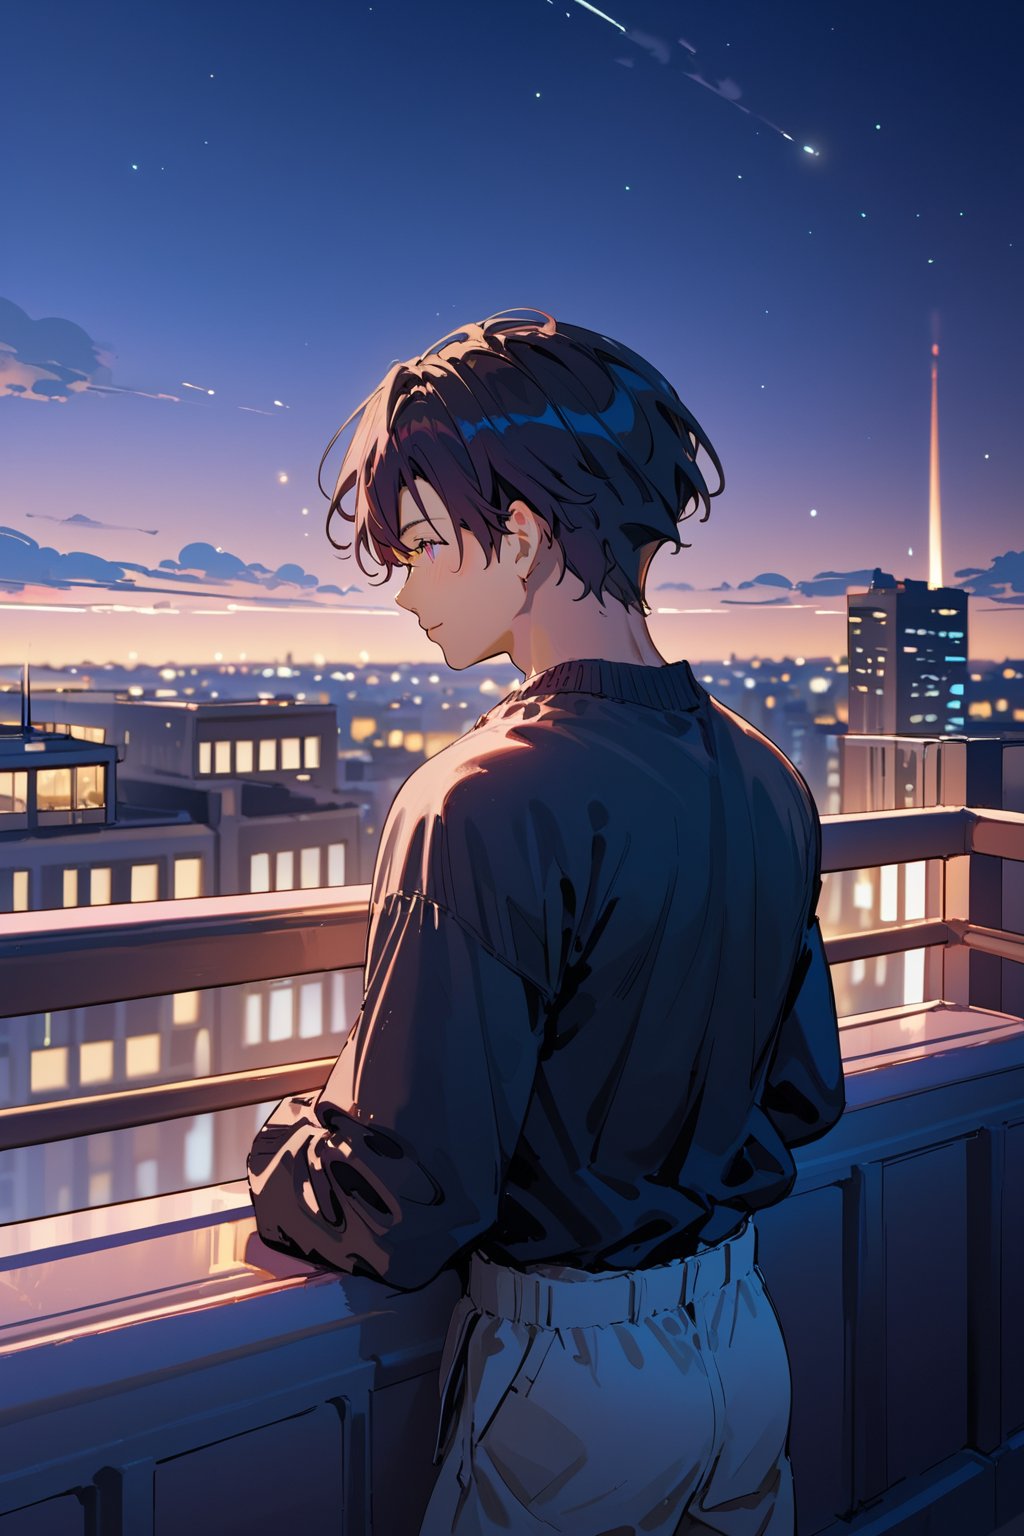 Score_9, Score_8_up, Score_7_up, Score_6_up, Score_5_up, Score_4_up, night, 1boy (black hair), sexy, standing on the balcony of a building,city, modern city, night,looking at the front building, shirt, hetero, brown_hair, night_sky, couple, sky, long_sleeves, cityscape,jaeggernawtcity,2b-Eimi